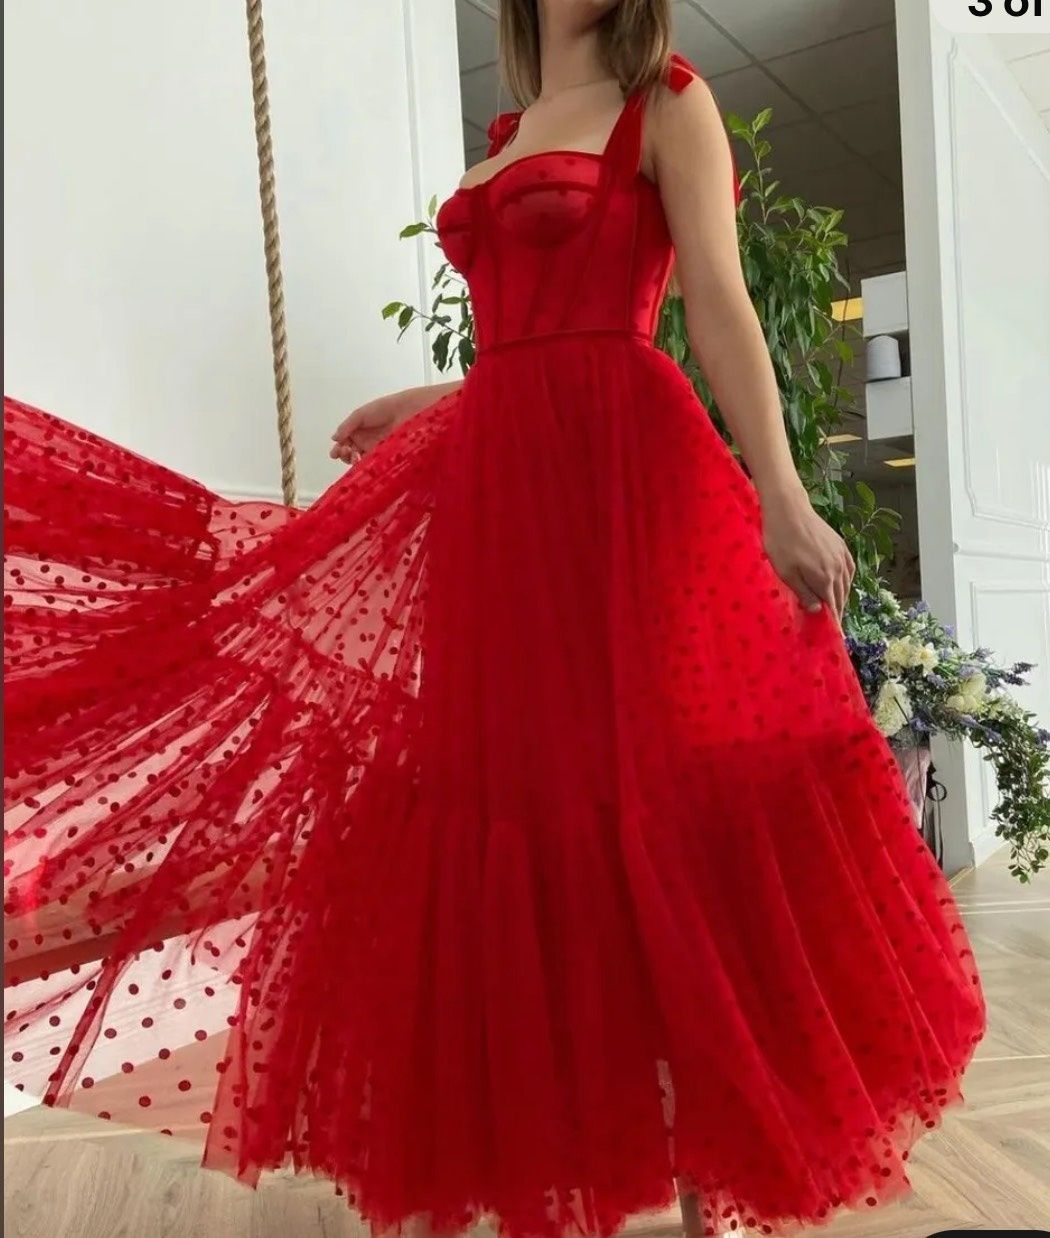 Teuta Matoshi Size 4 Prom Plunge Red Cocktail Dress on Queenly